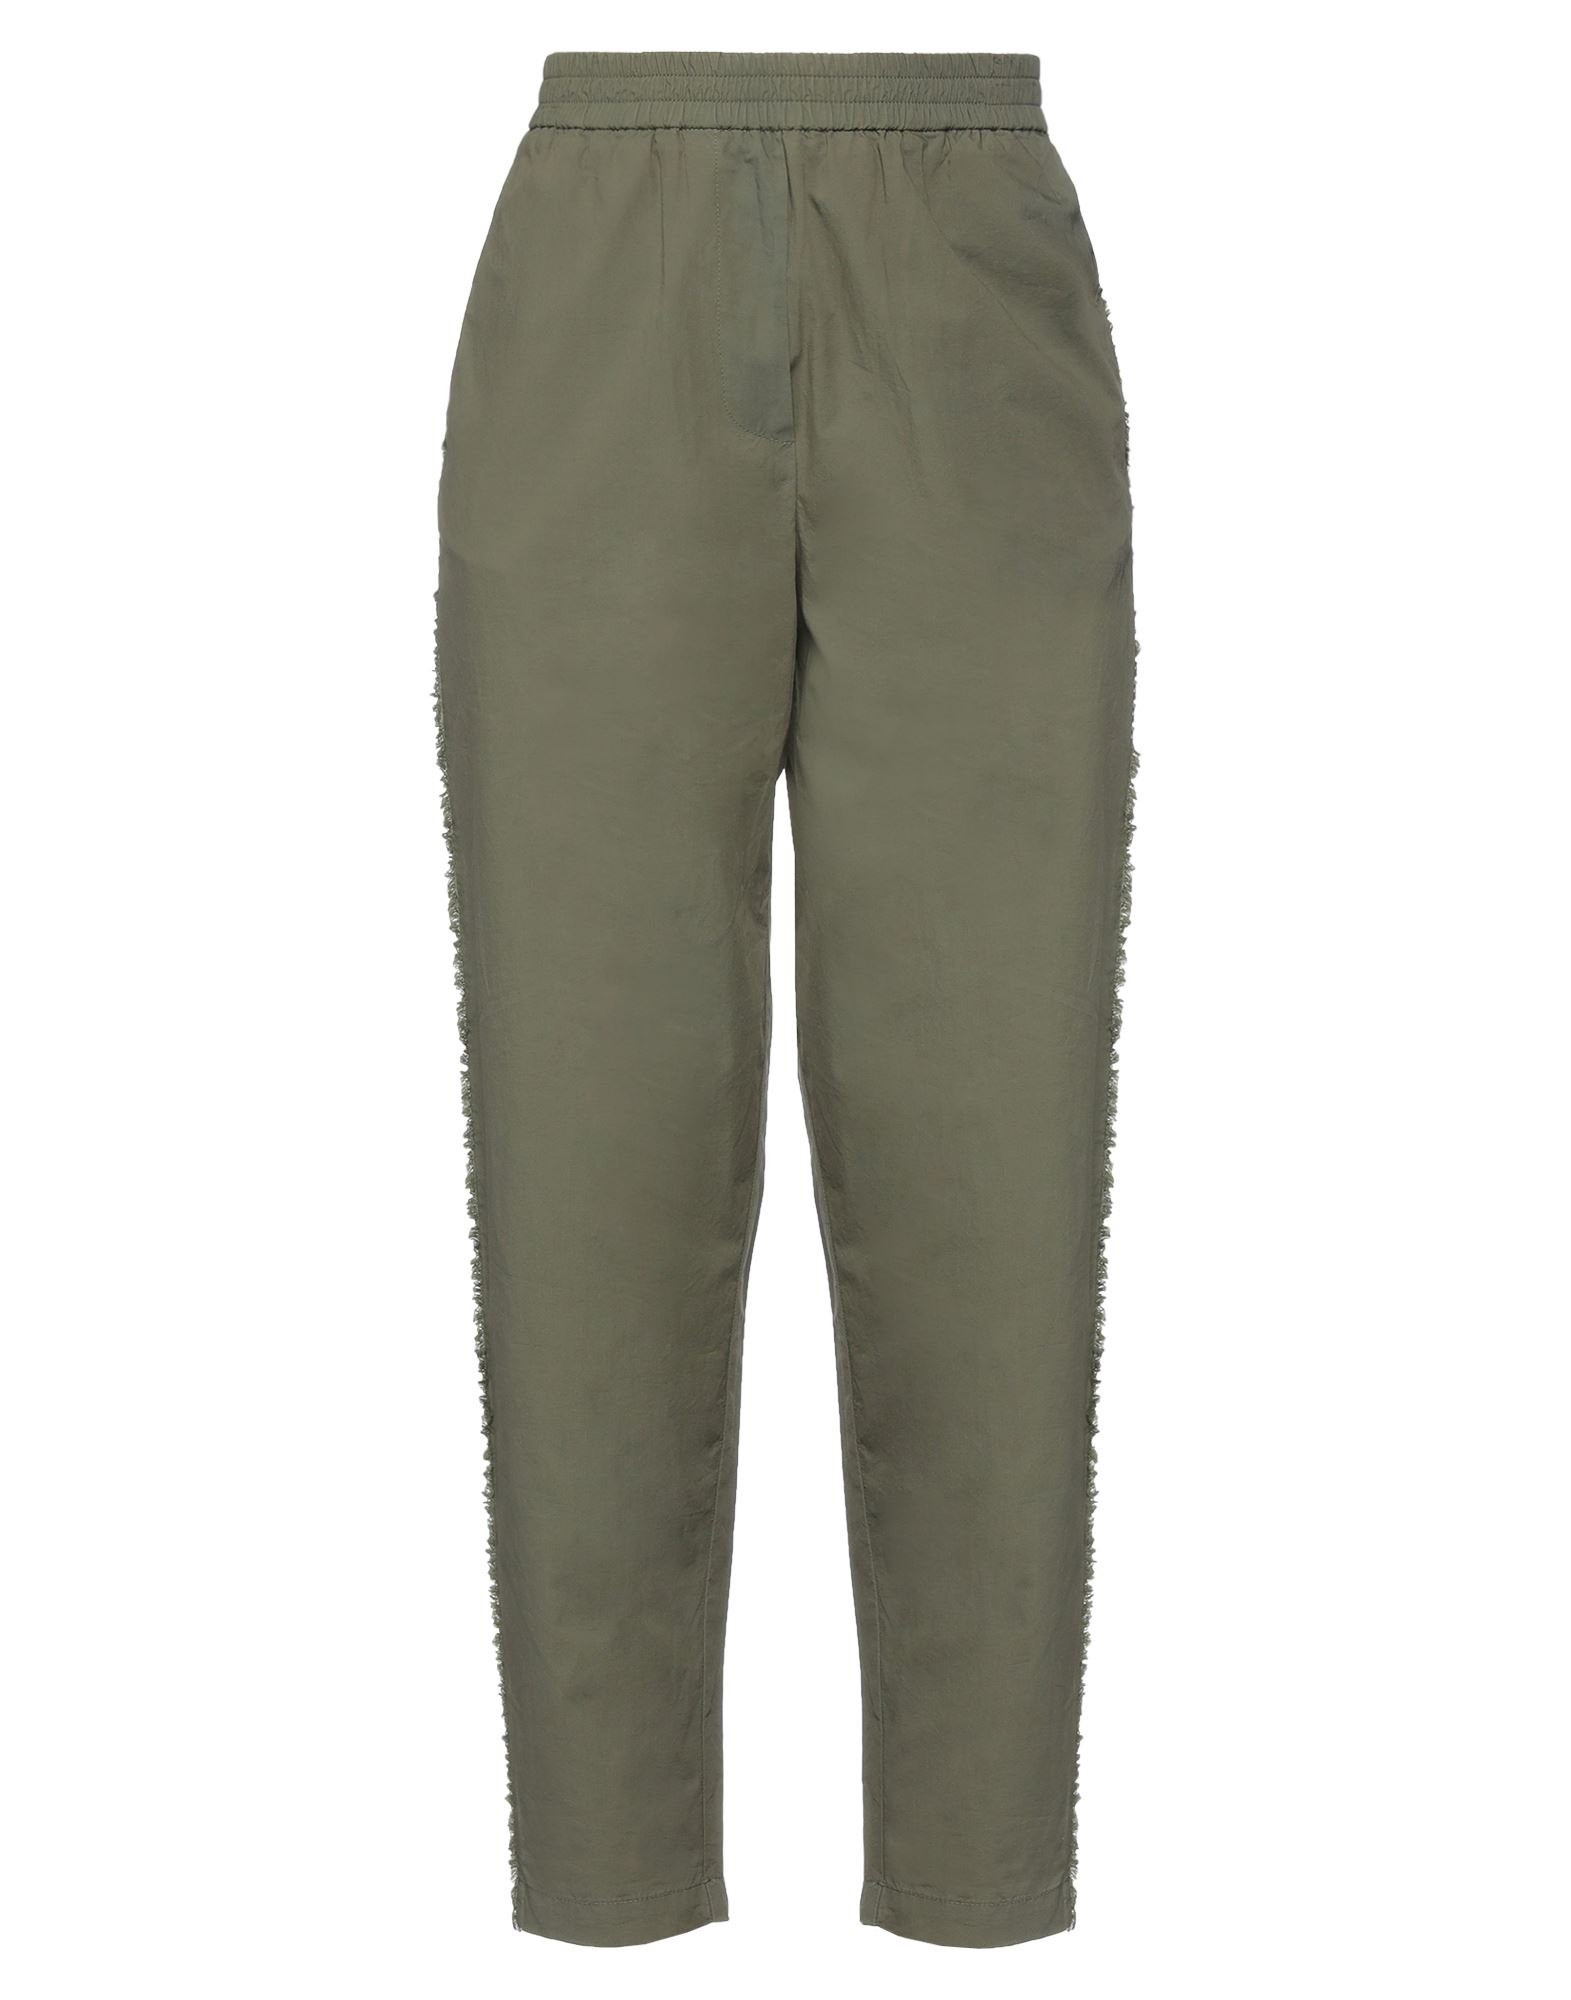 8pm Pants In Sage Green